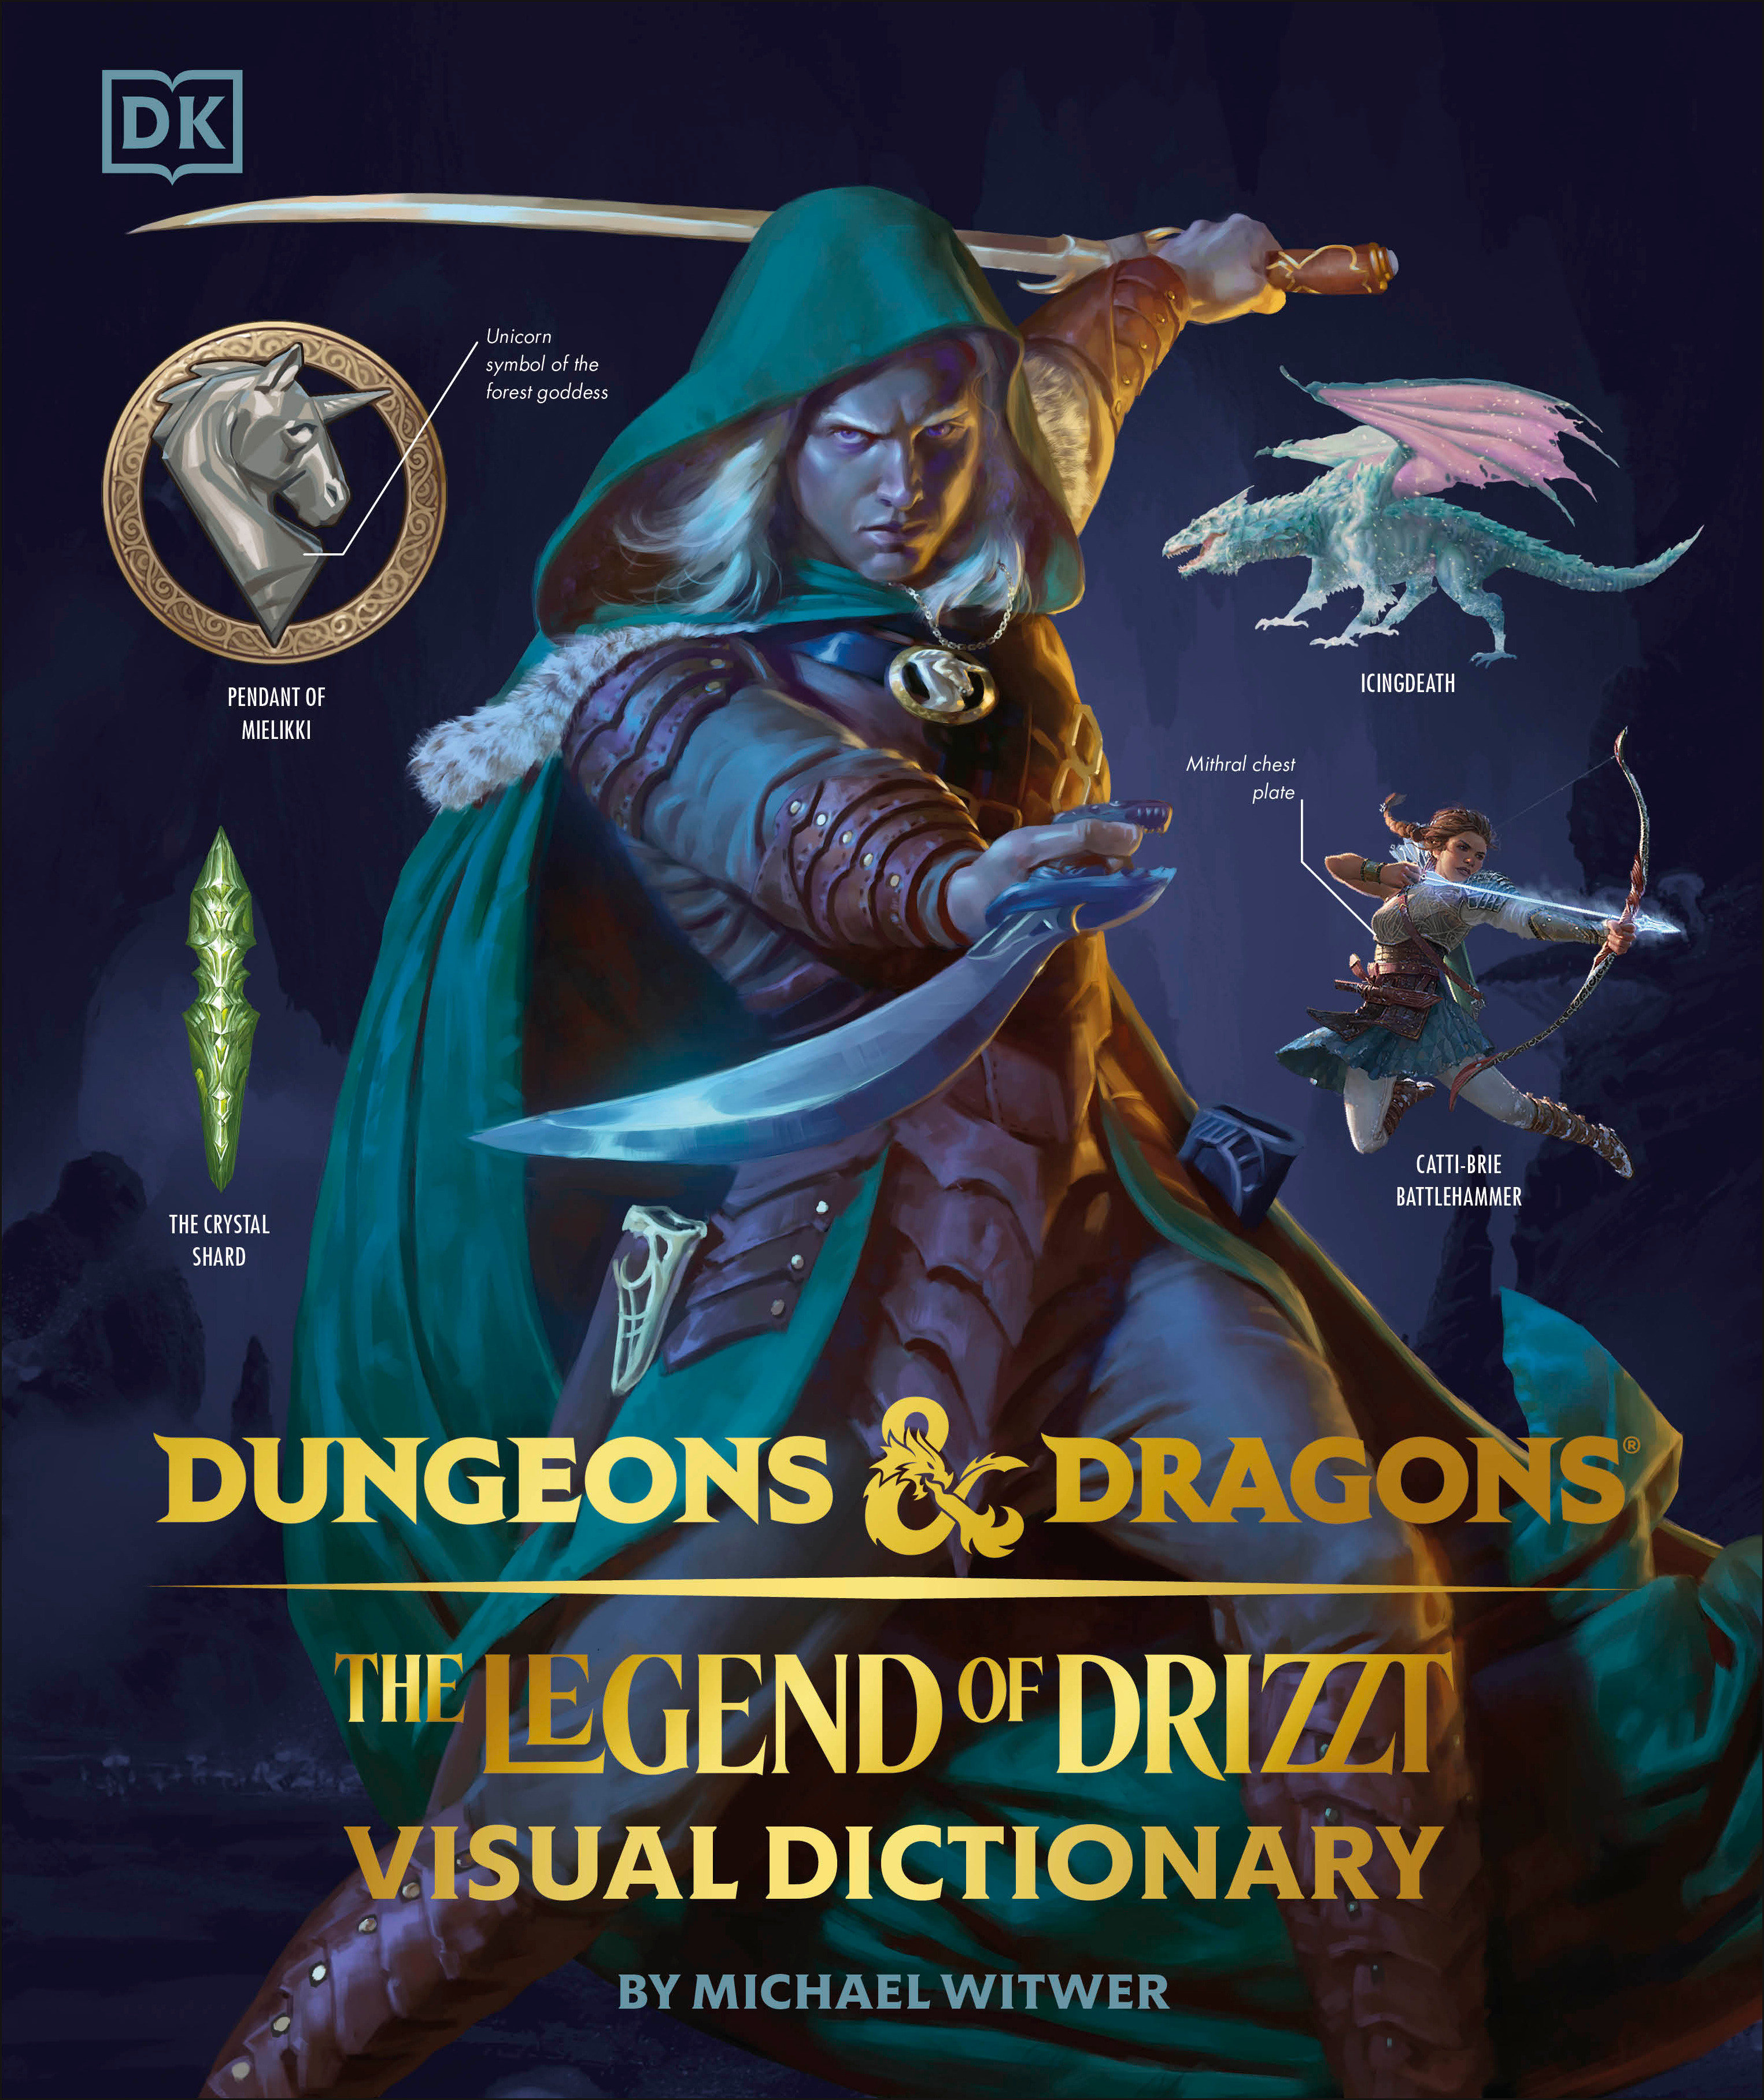 Dungeons And Dragons The Legend of Drizzt Visual Dictionary Hardcover Book